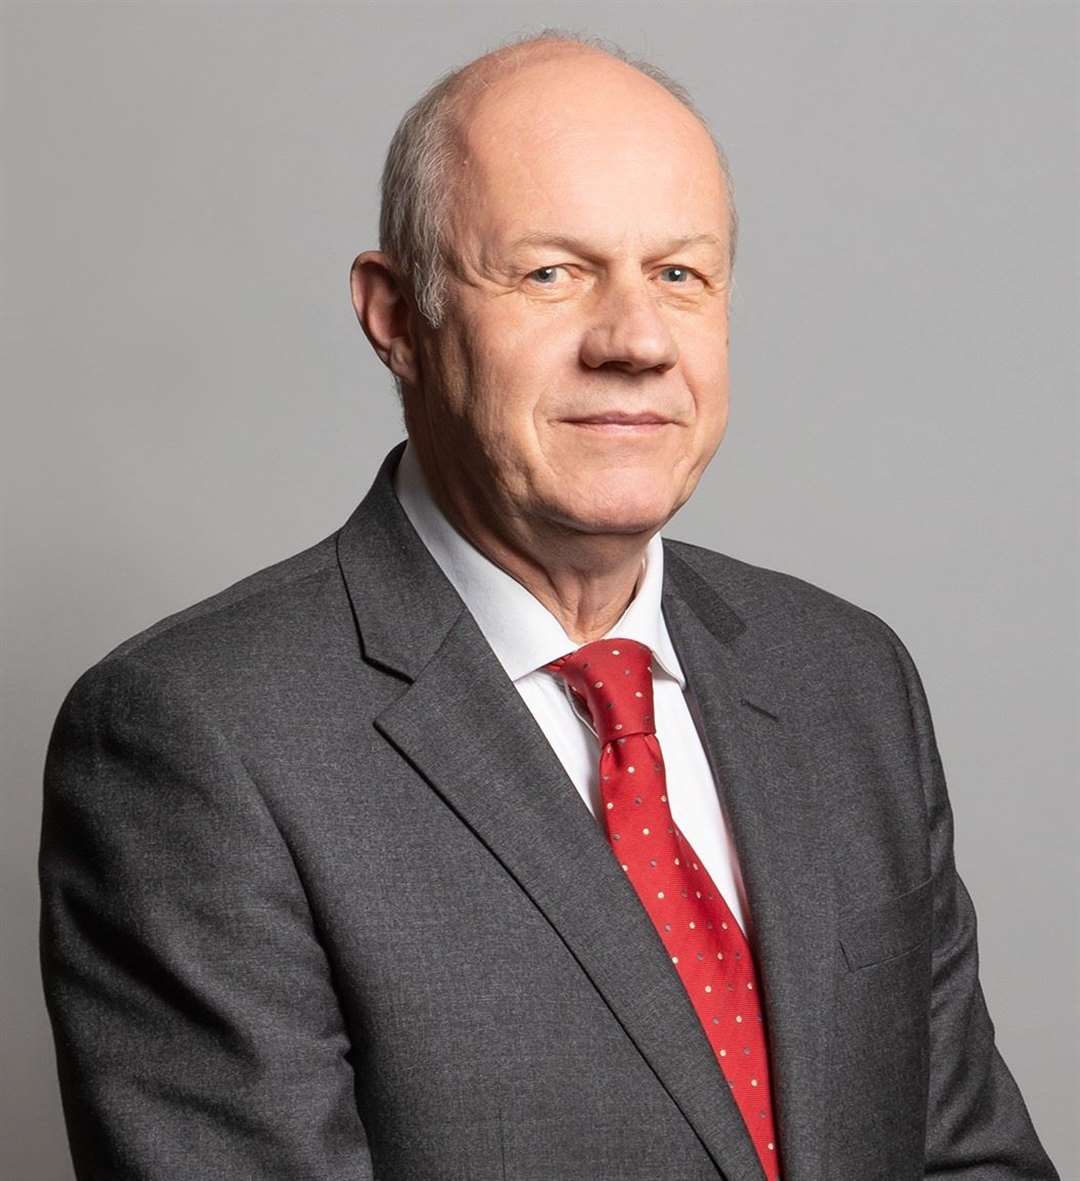 Damian Green MP supports any police action to tackle catapult crime